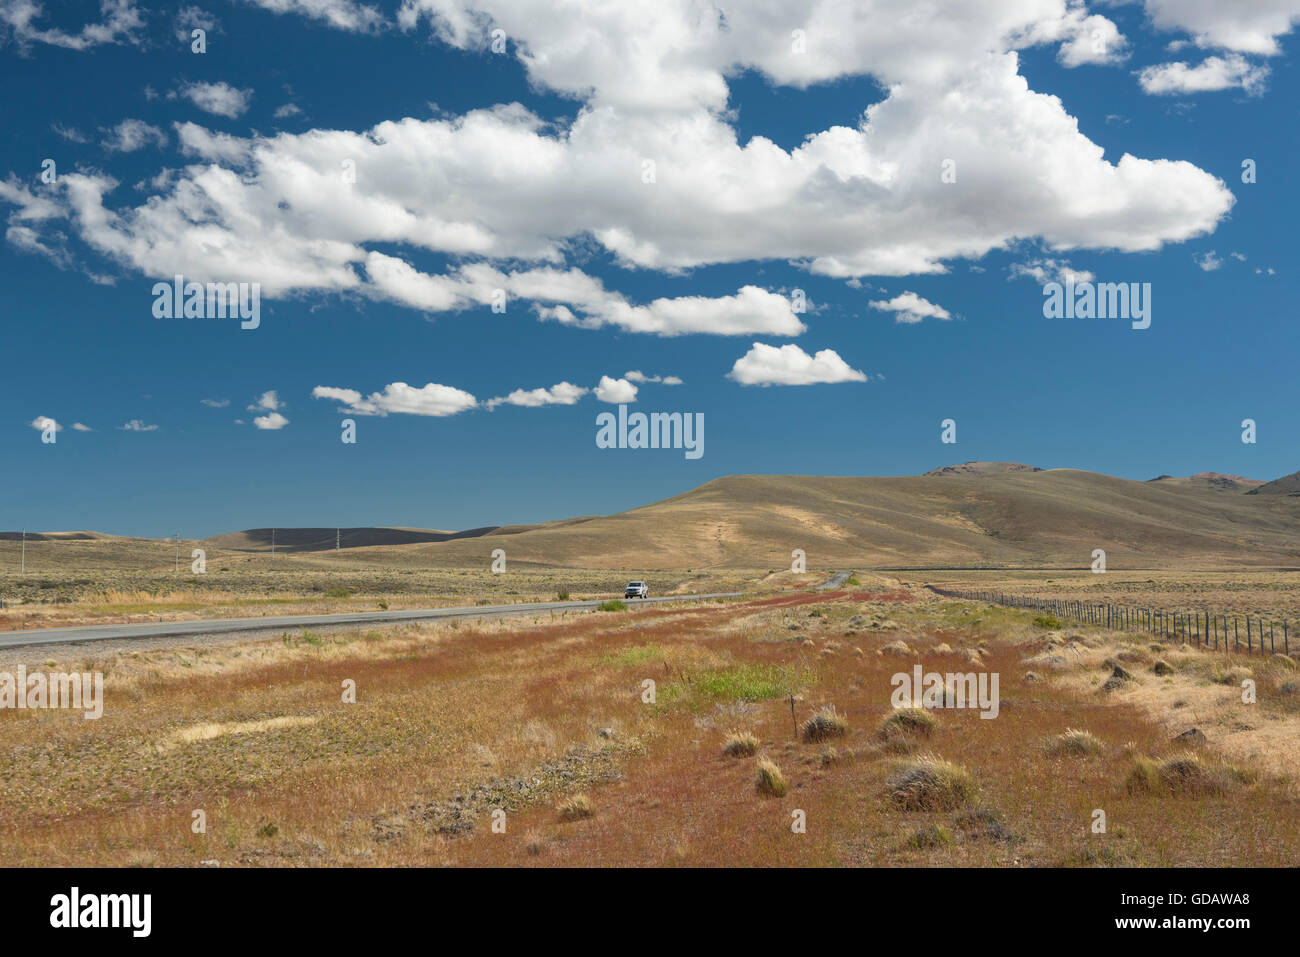 South America,Argentina,Patagonia,Chubut,highway,Ruta 40,highway Stock Photo